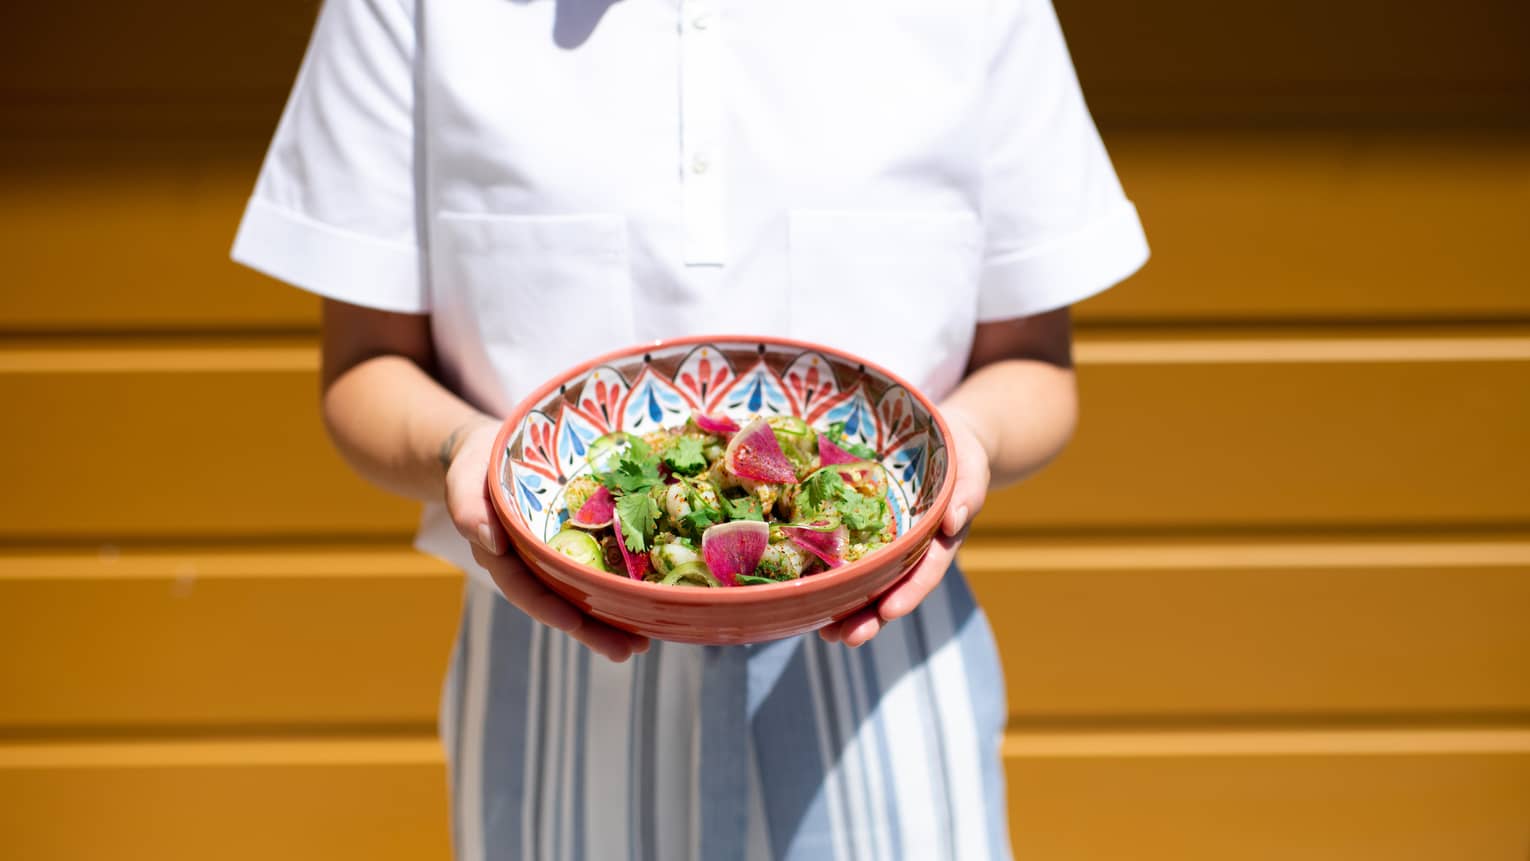 Person holding a Mexican-inspired serving dish with a fresh salad in it